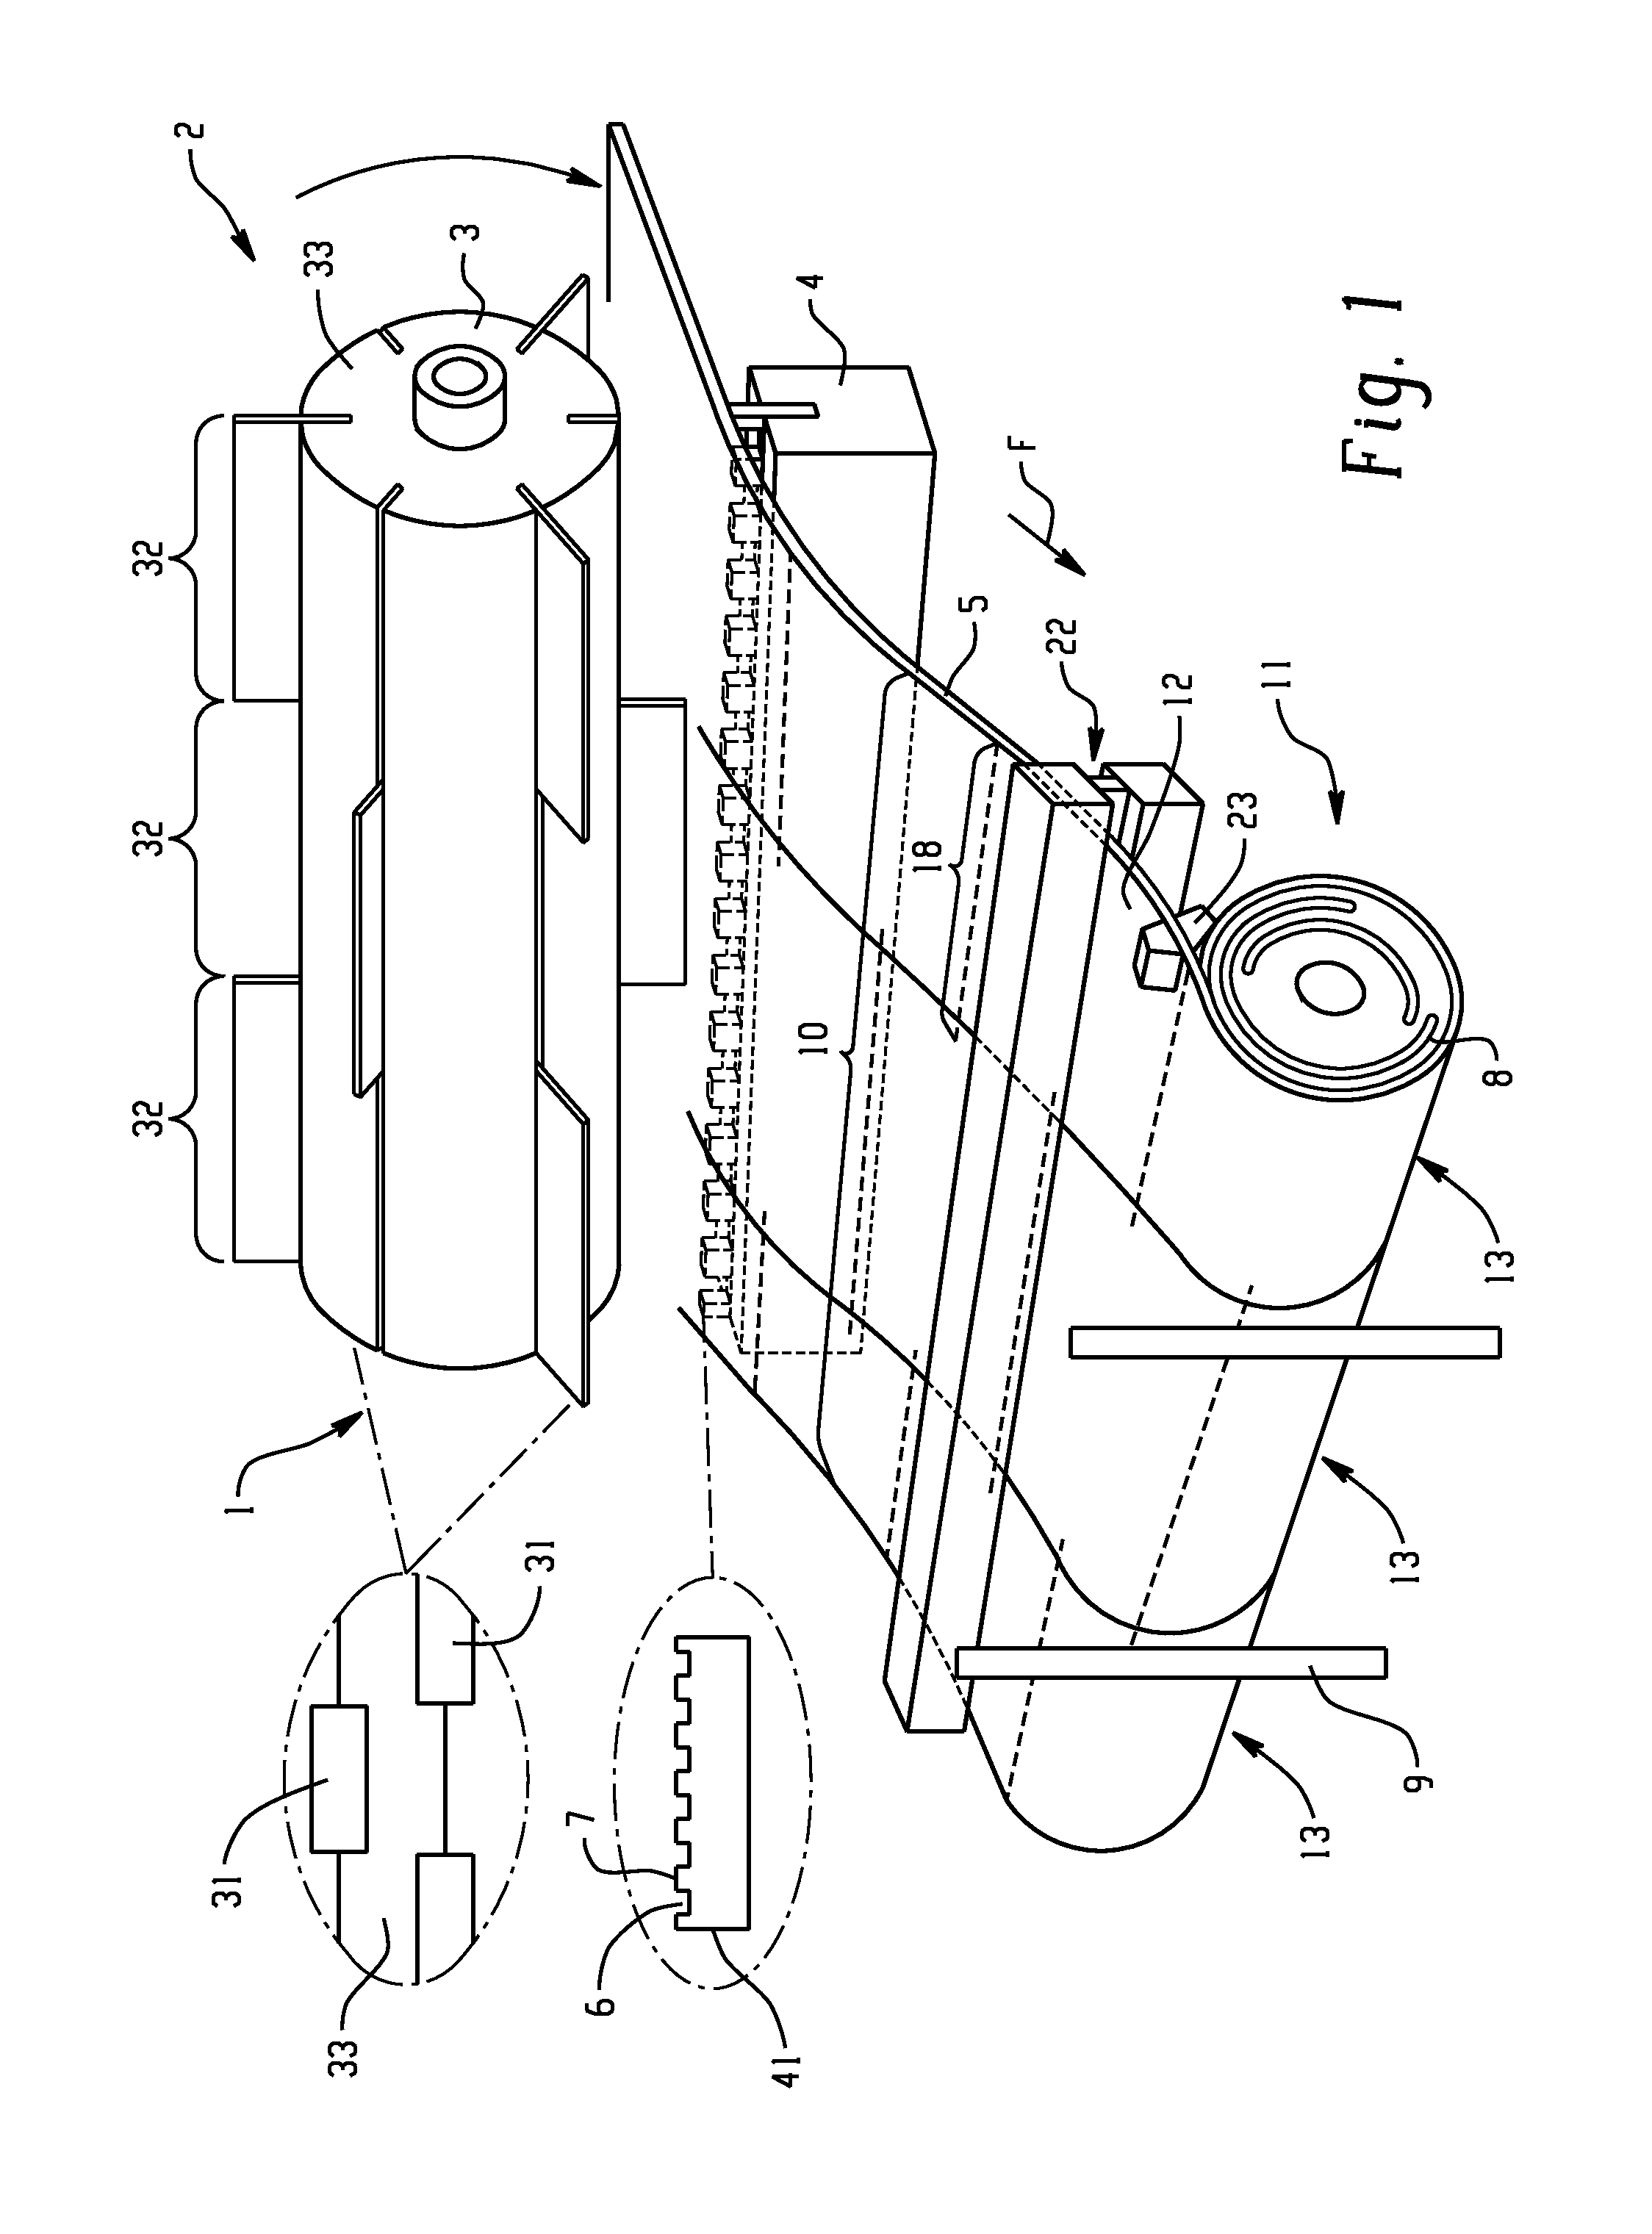 Method for Manufacturing a Sheet Product for Use in a Dispenser and Strip of Sheet Product